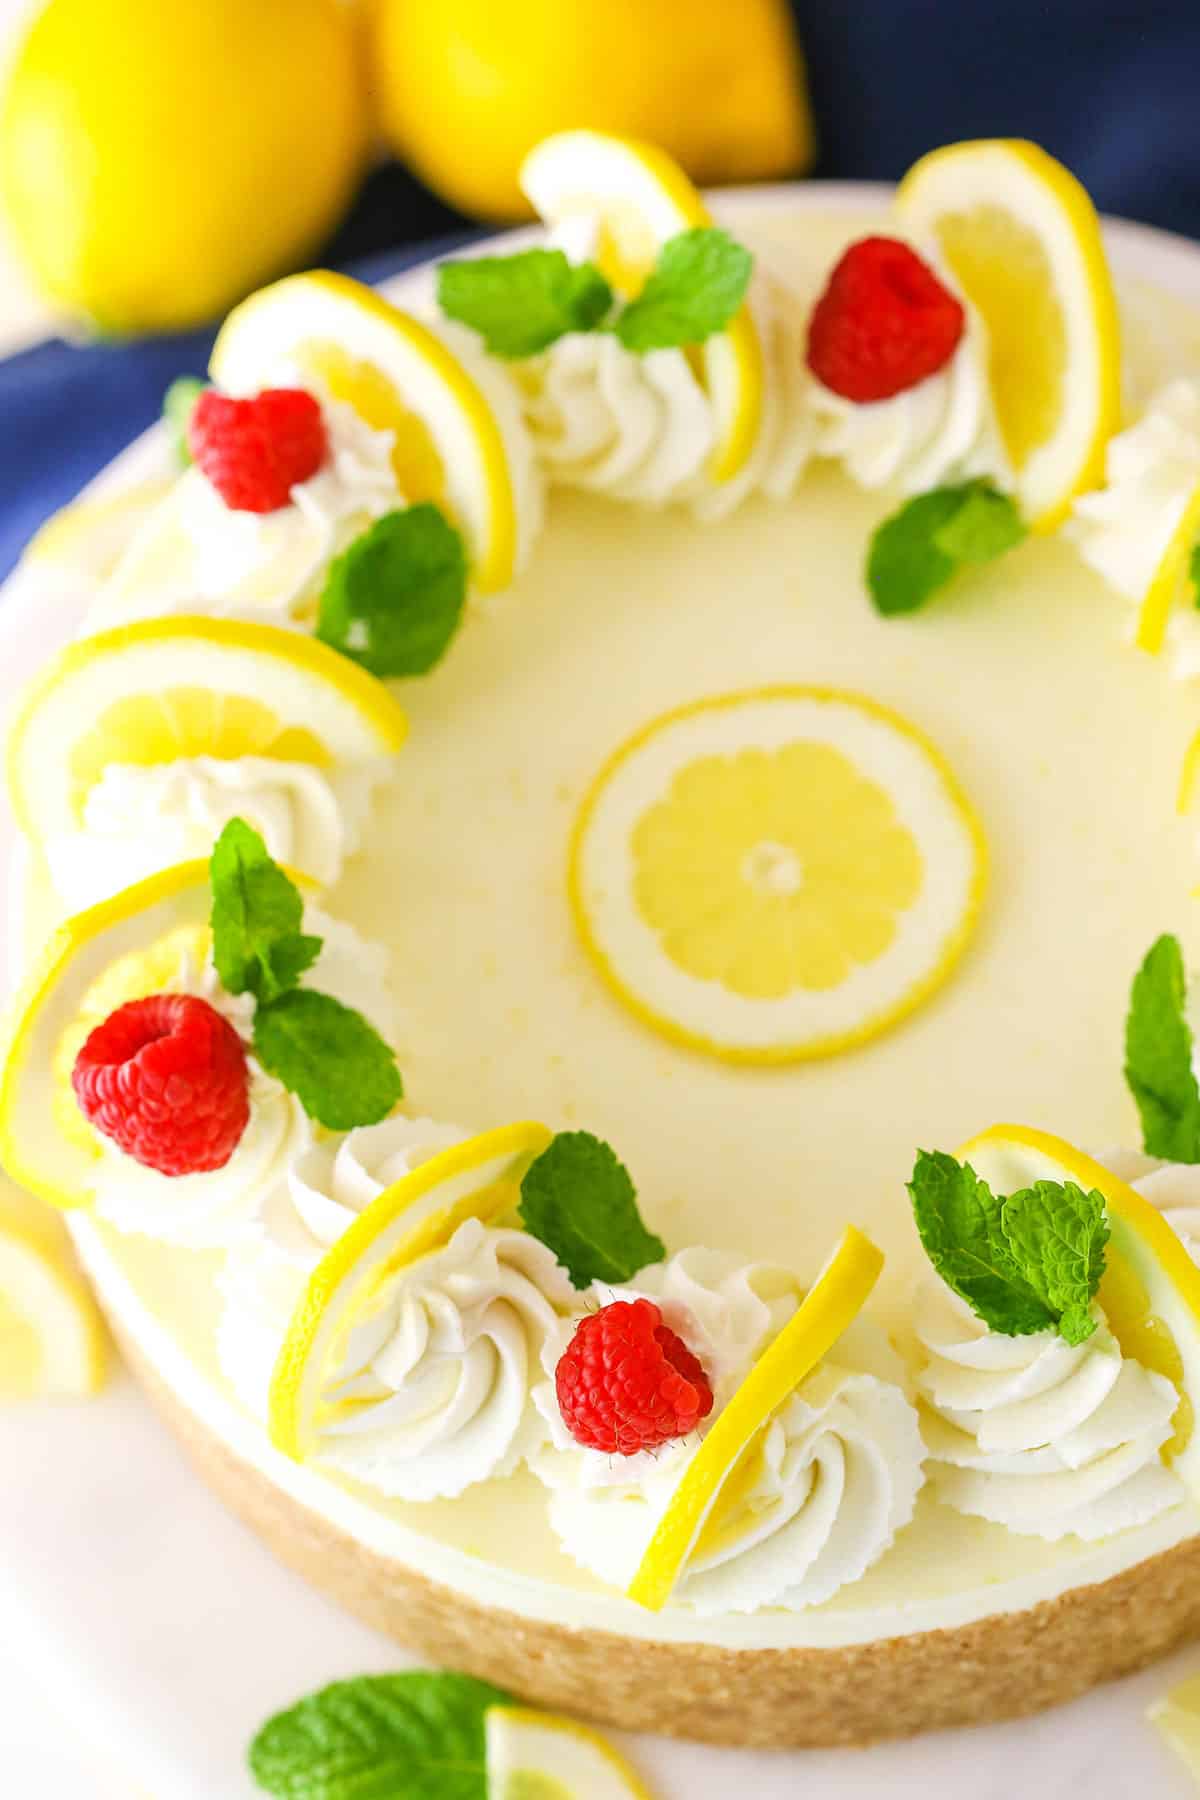 Overhead view of a whole No Bake Lemon Cheesecake on a white cake stand